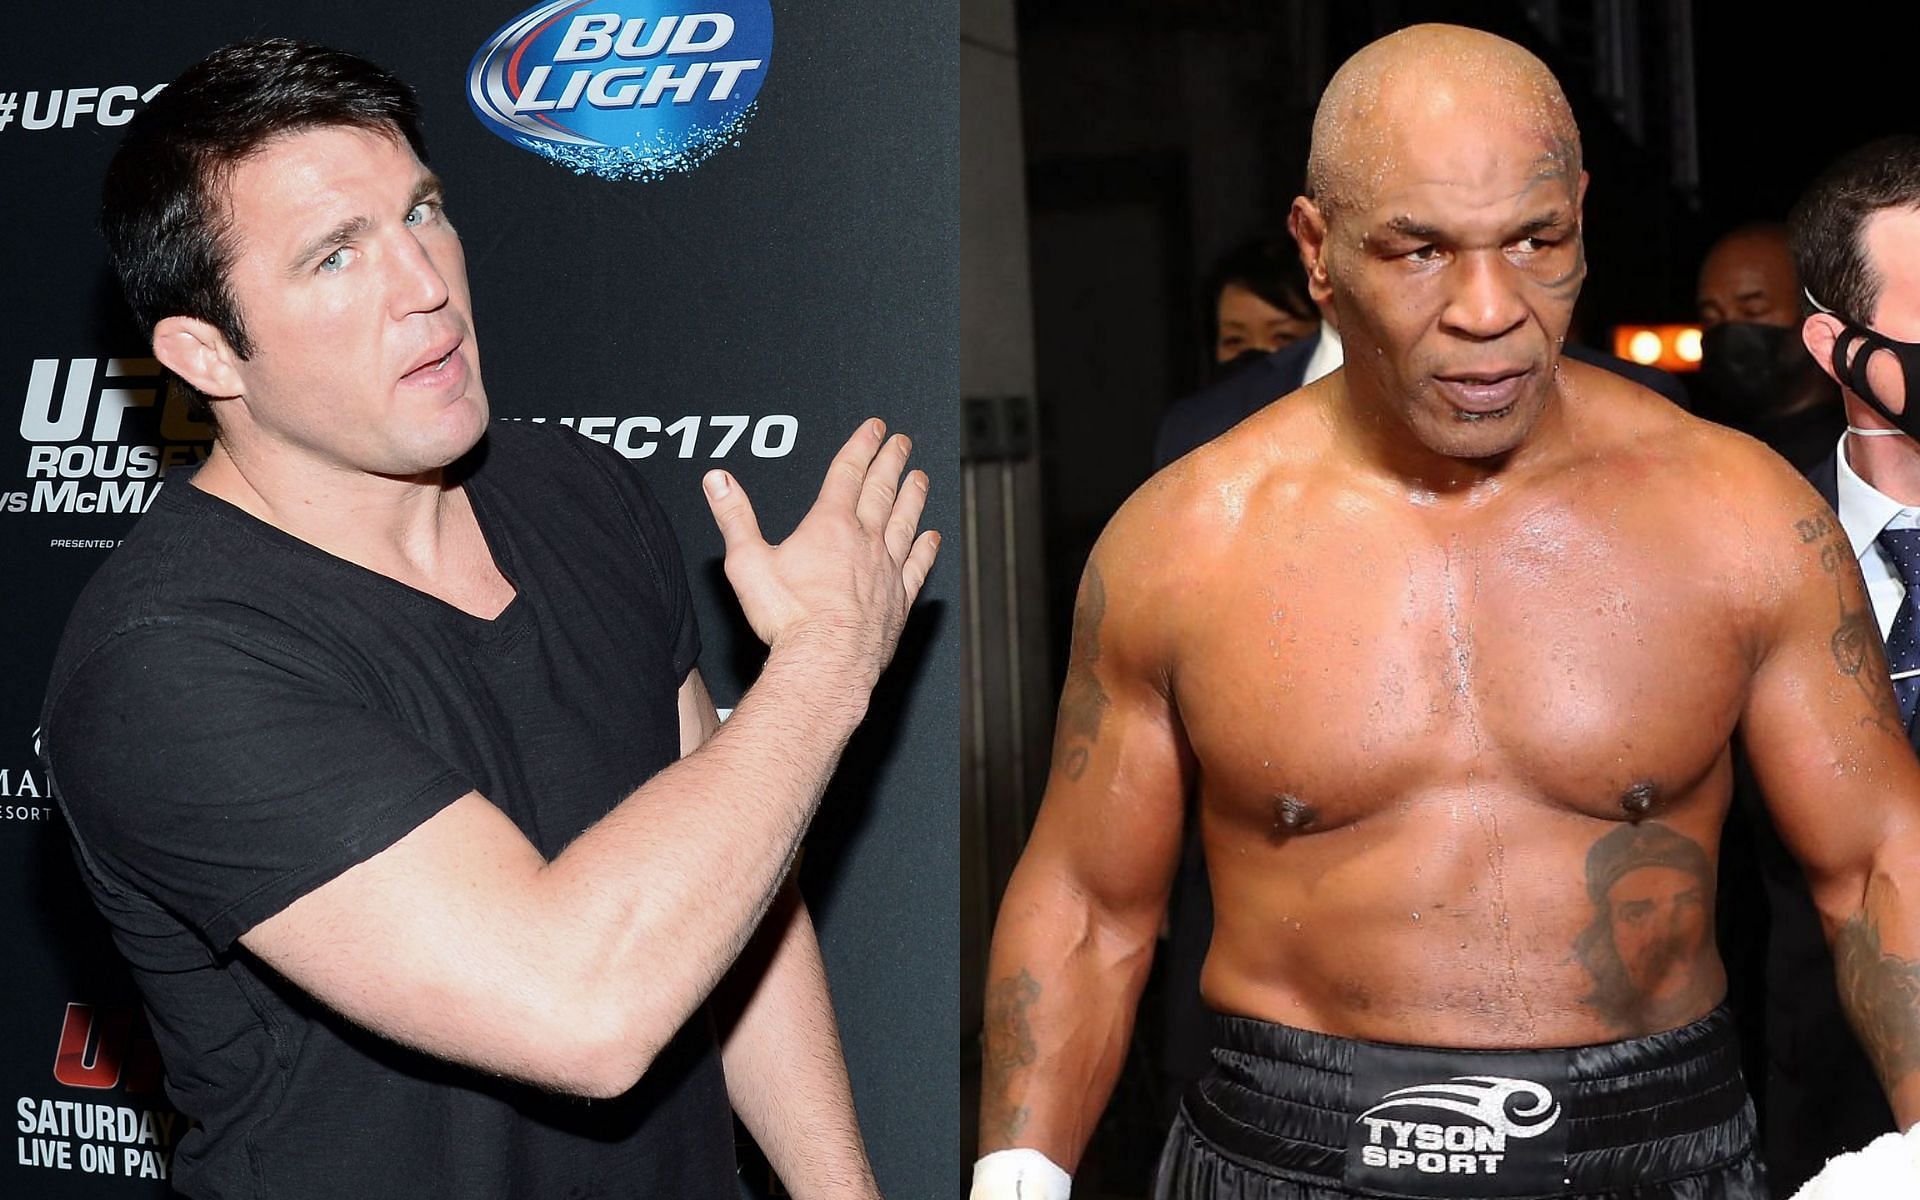 Chael Sonnen (left) and Mike Tyson (right)